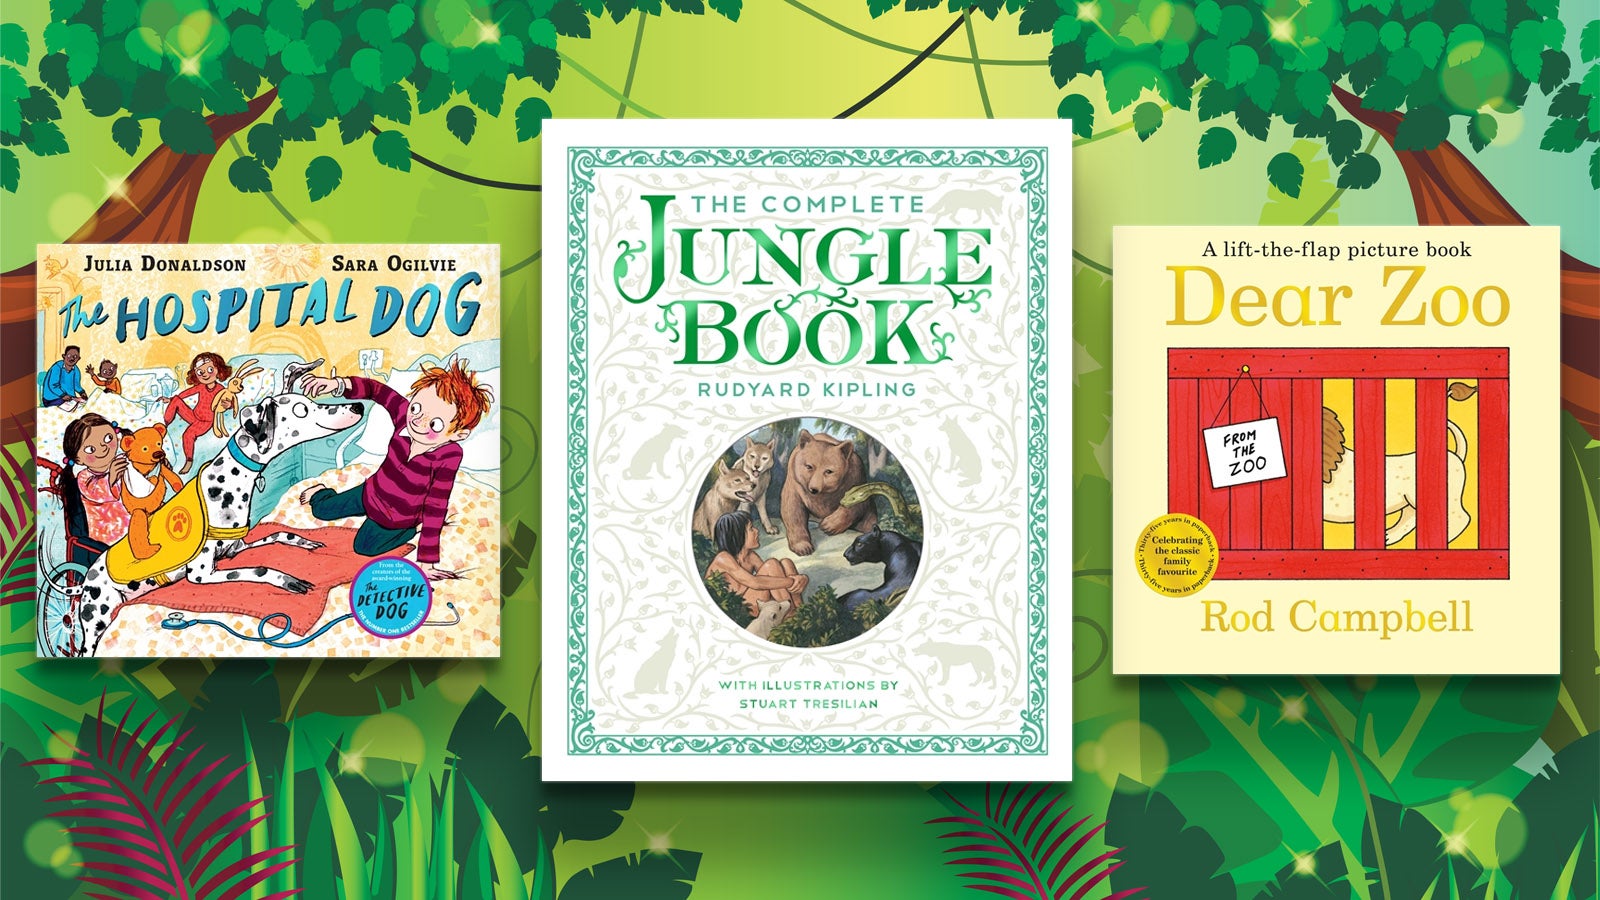 The Hospital Dog, The Complete Jungle Book and Dear Zoo book covers